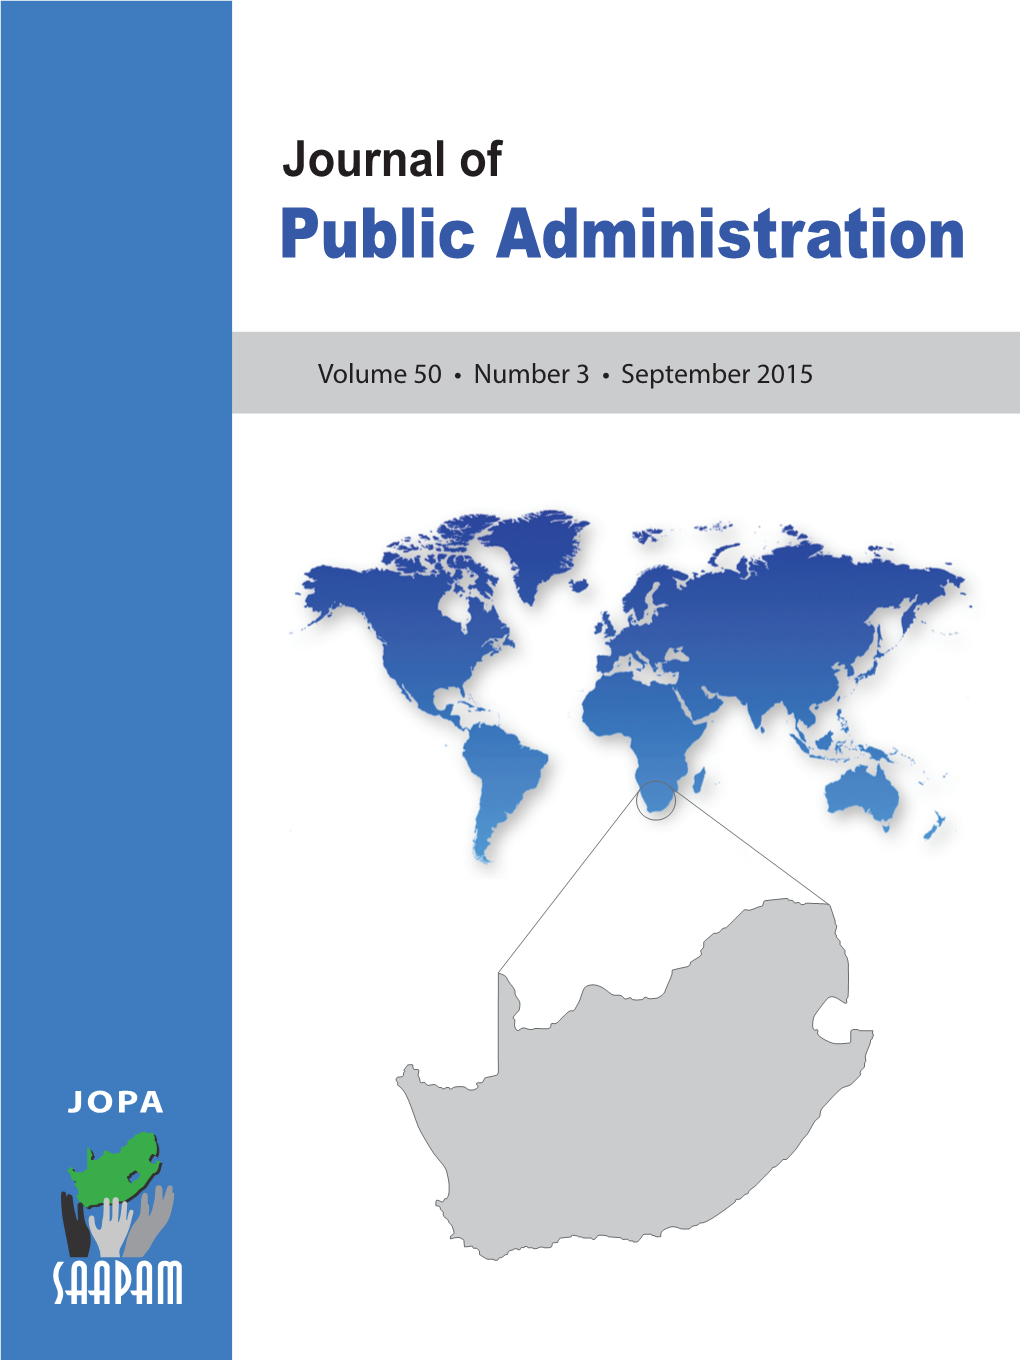 Journal of Public Administration